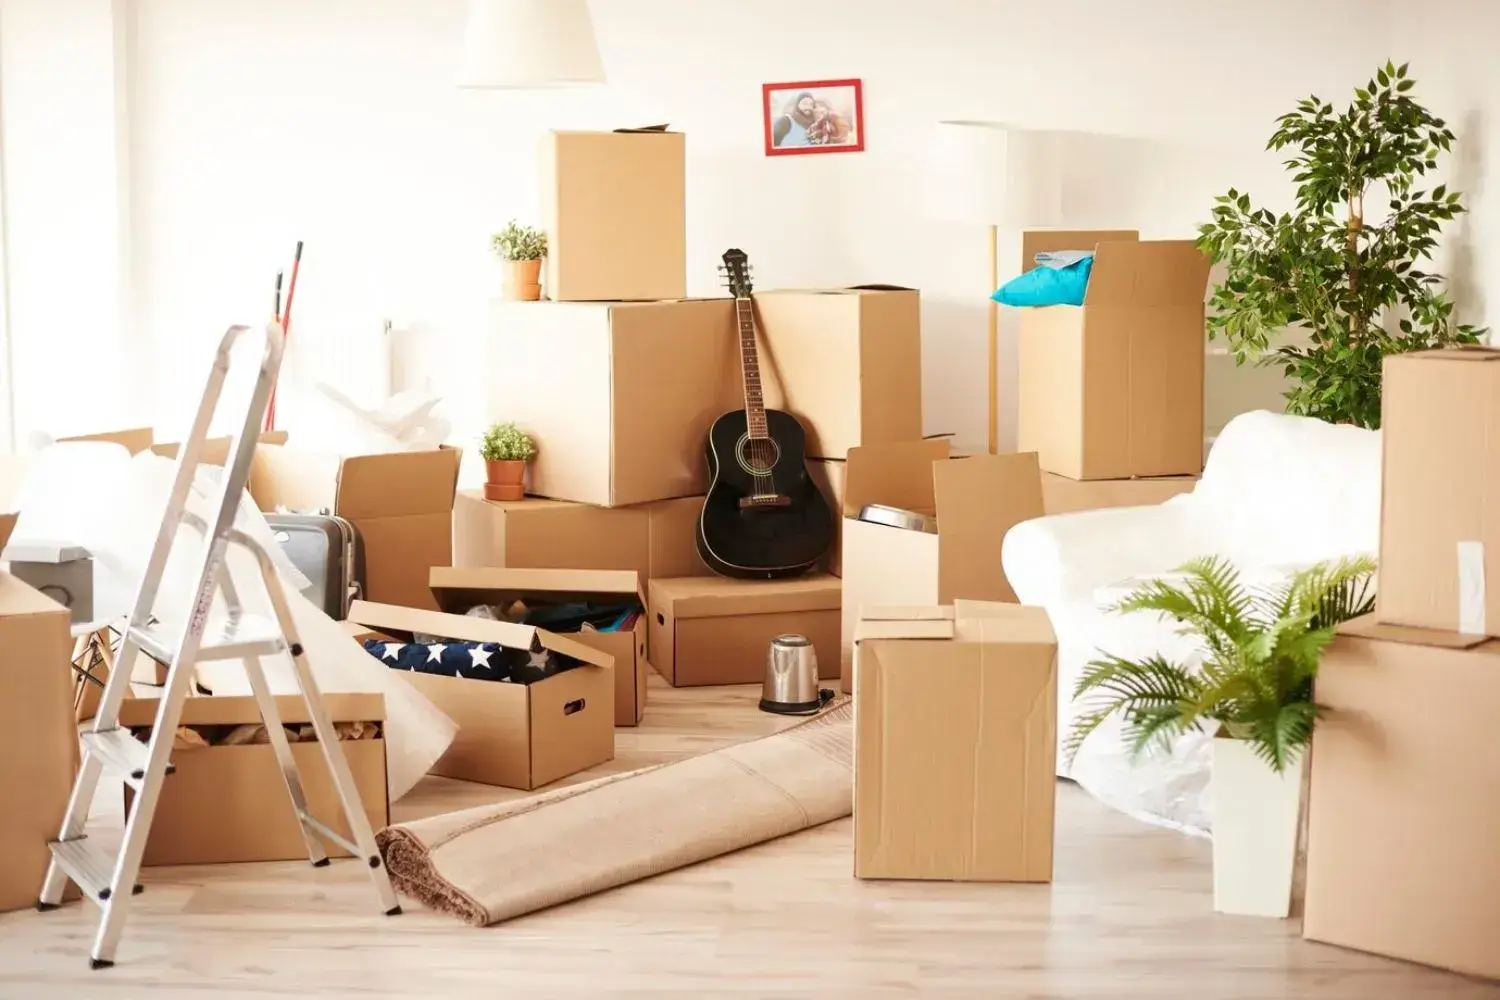 Discover seamless moves with our top-rated moving company in Union City. Best price guaranteed for efficient and stress-free relocation services.